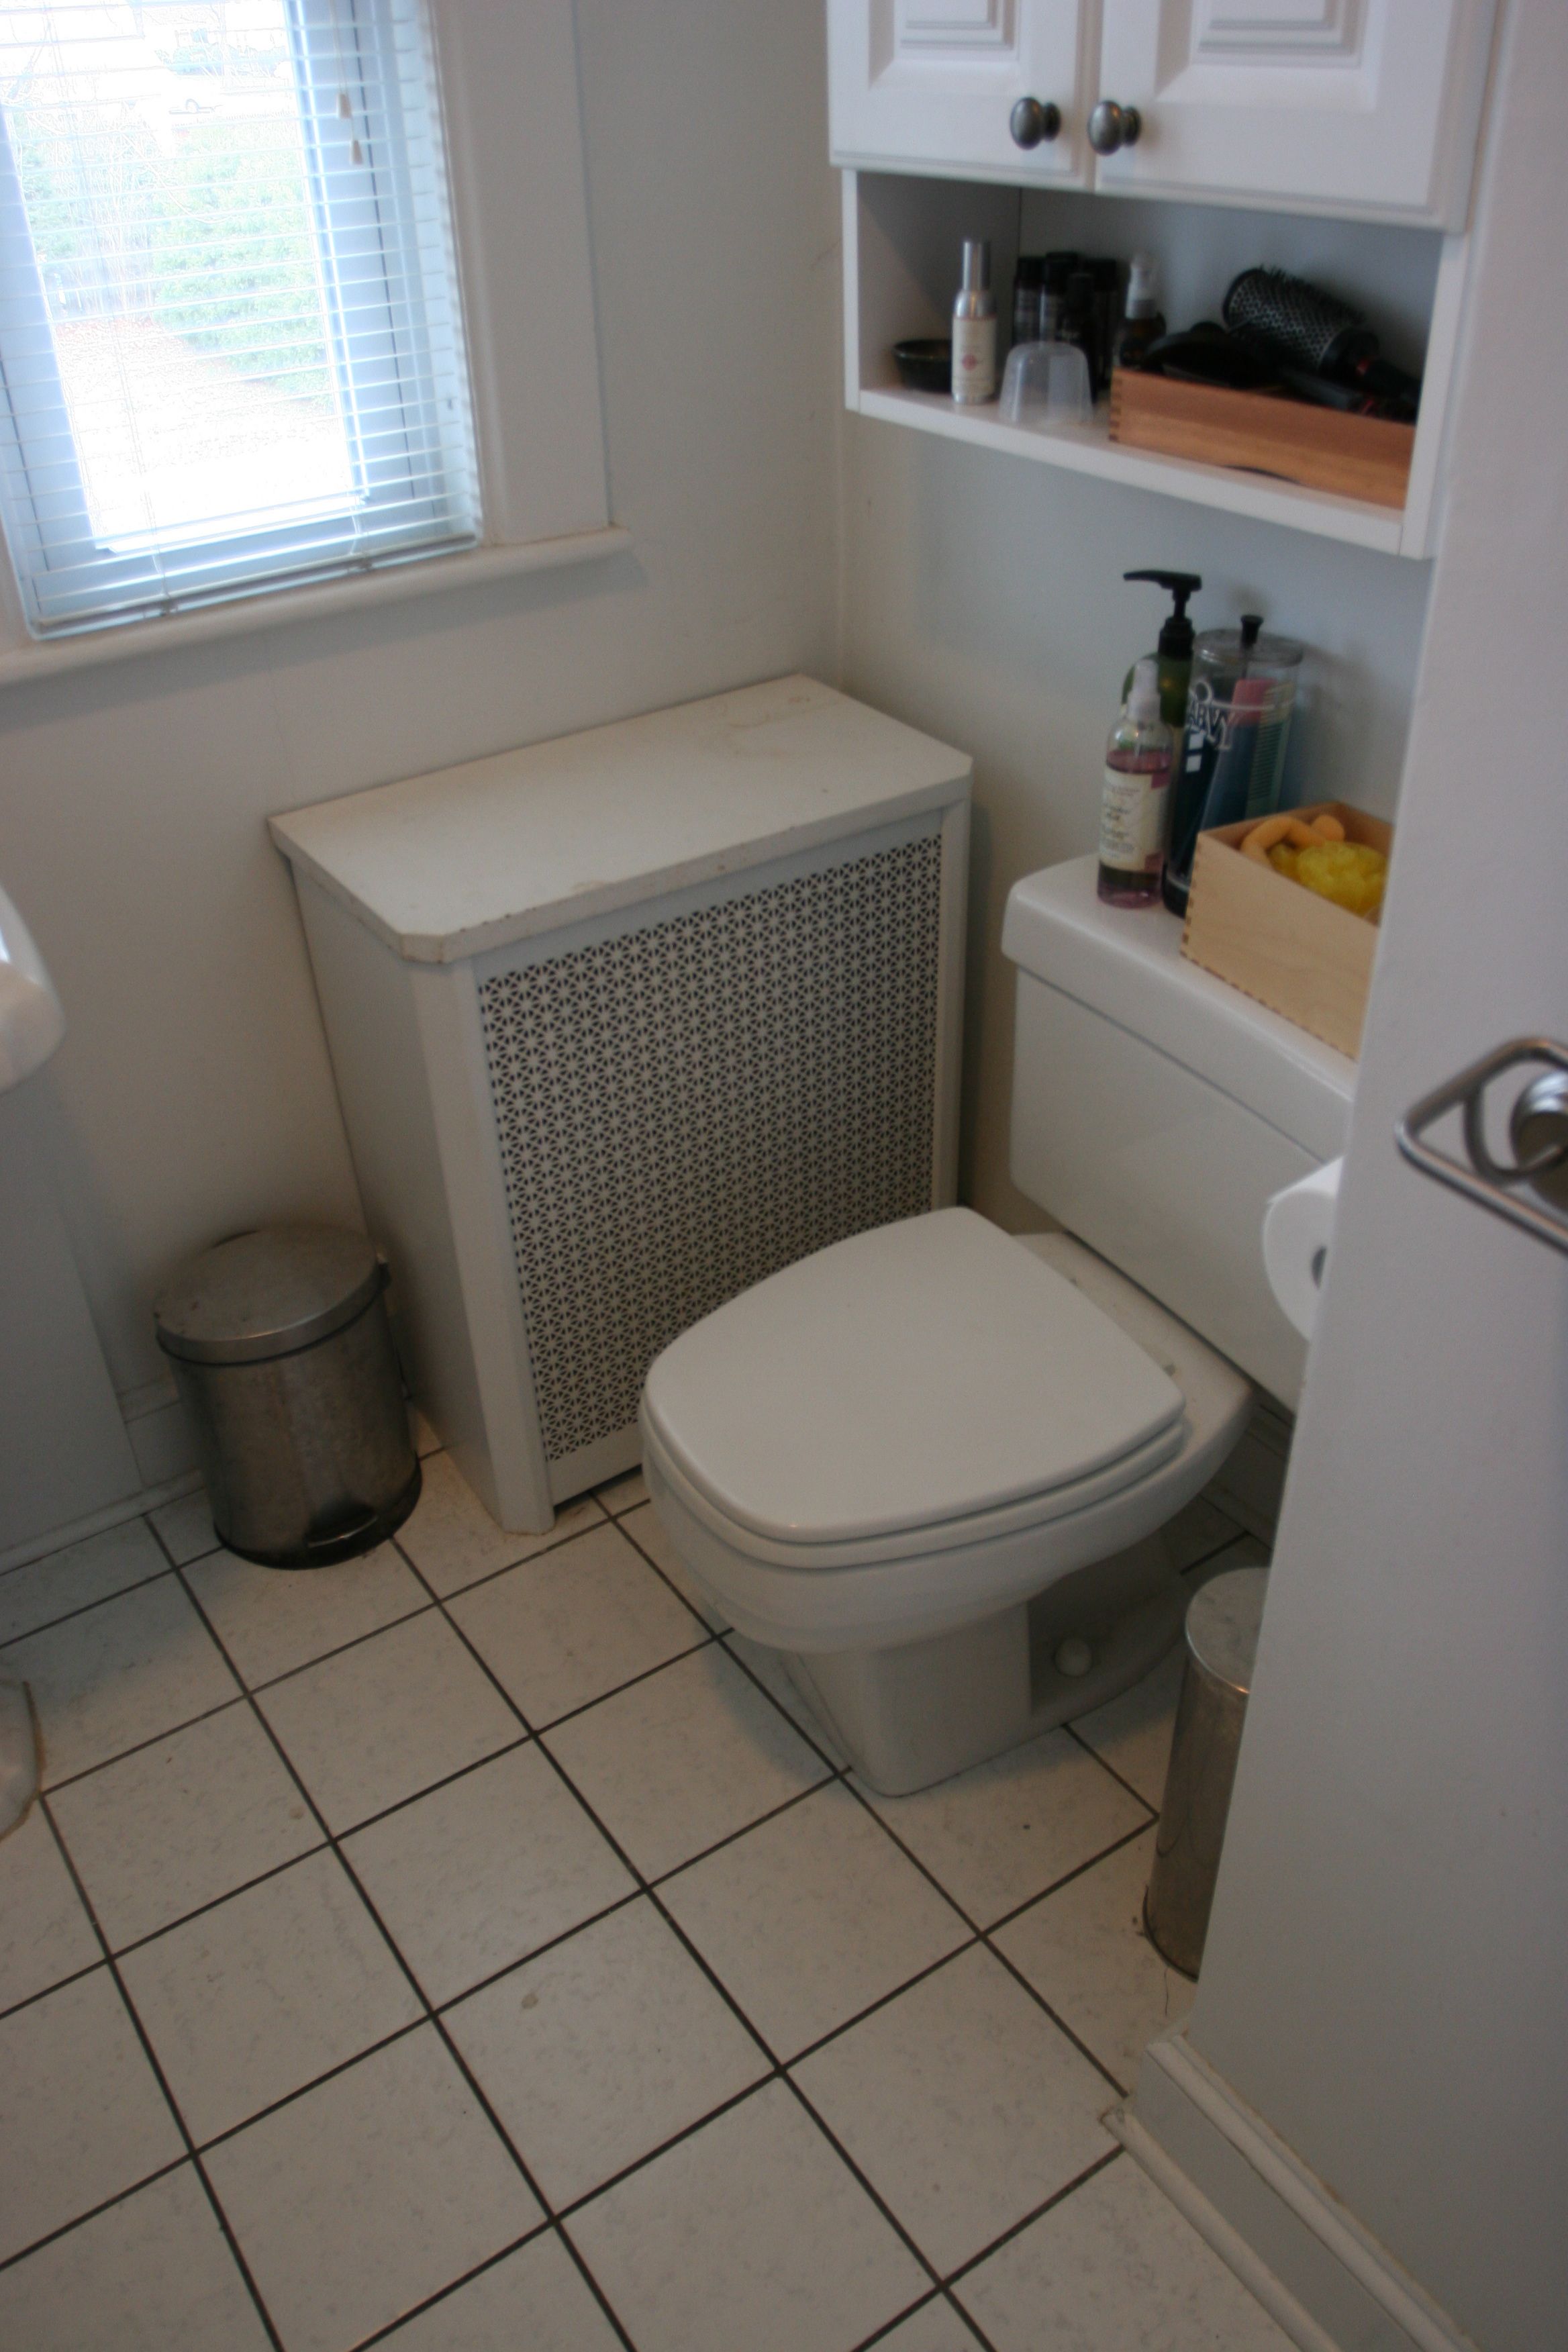 Weird, clunky toilet with squared off seat (which is impossible to replace!)... say your good-byes.